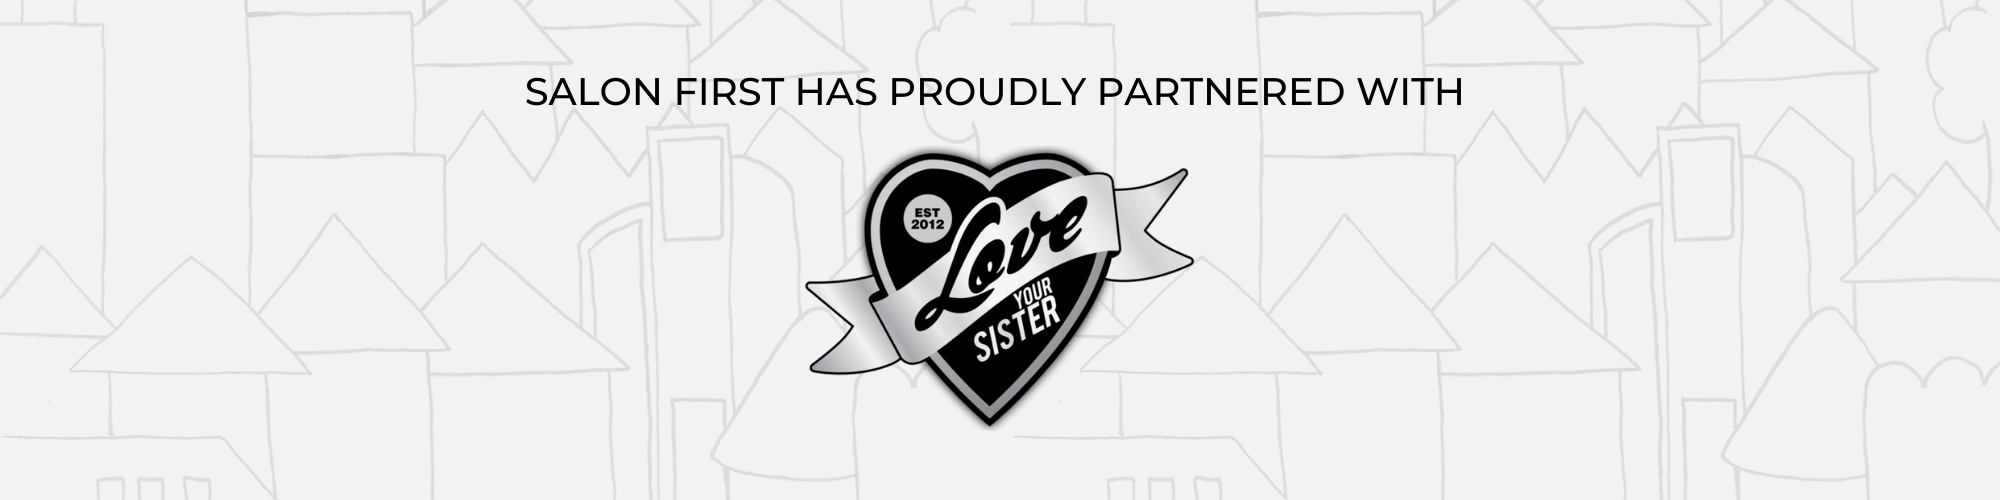 Salon First has proudly partnered with Love Your Sister Charity